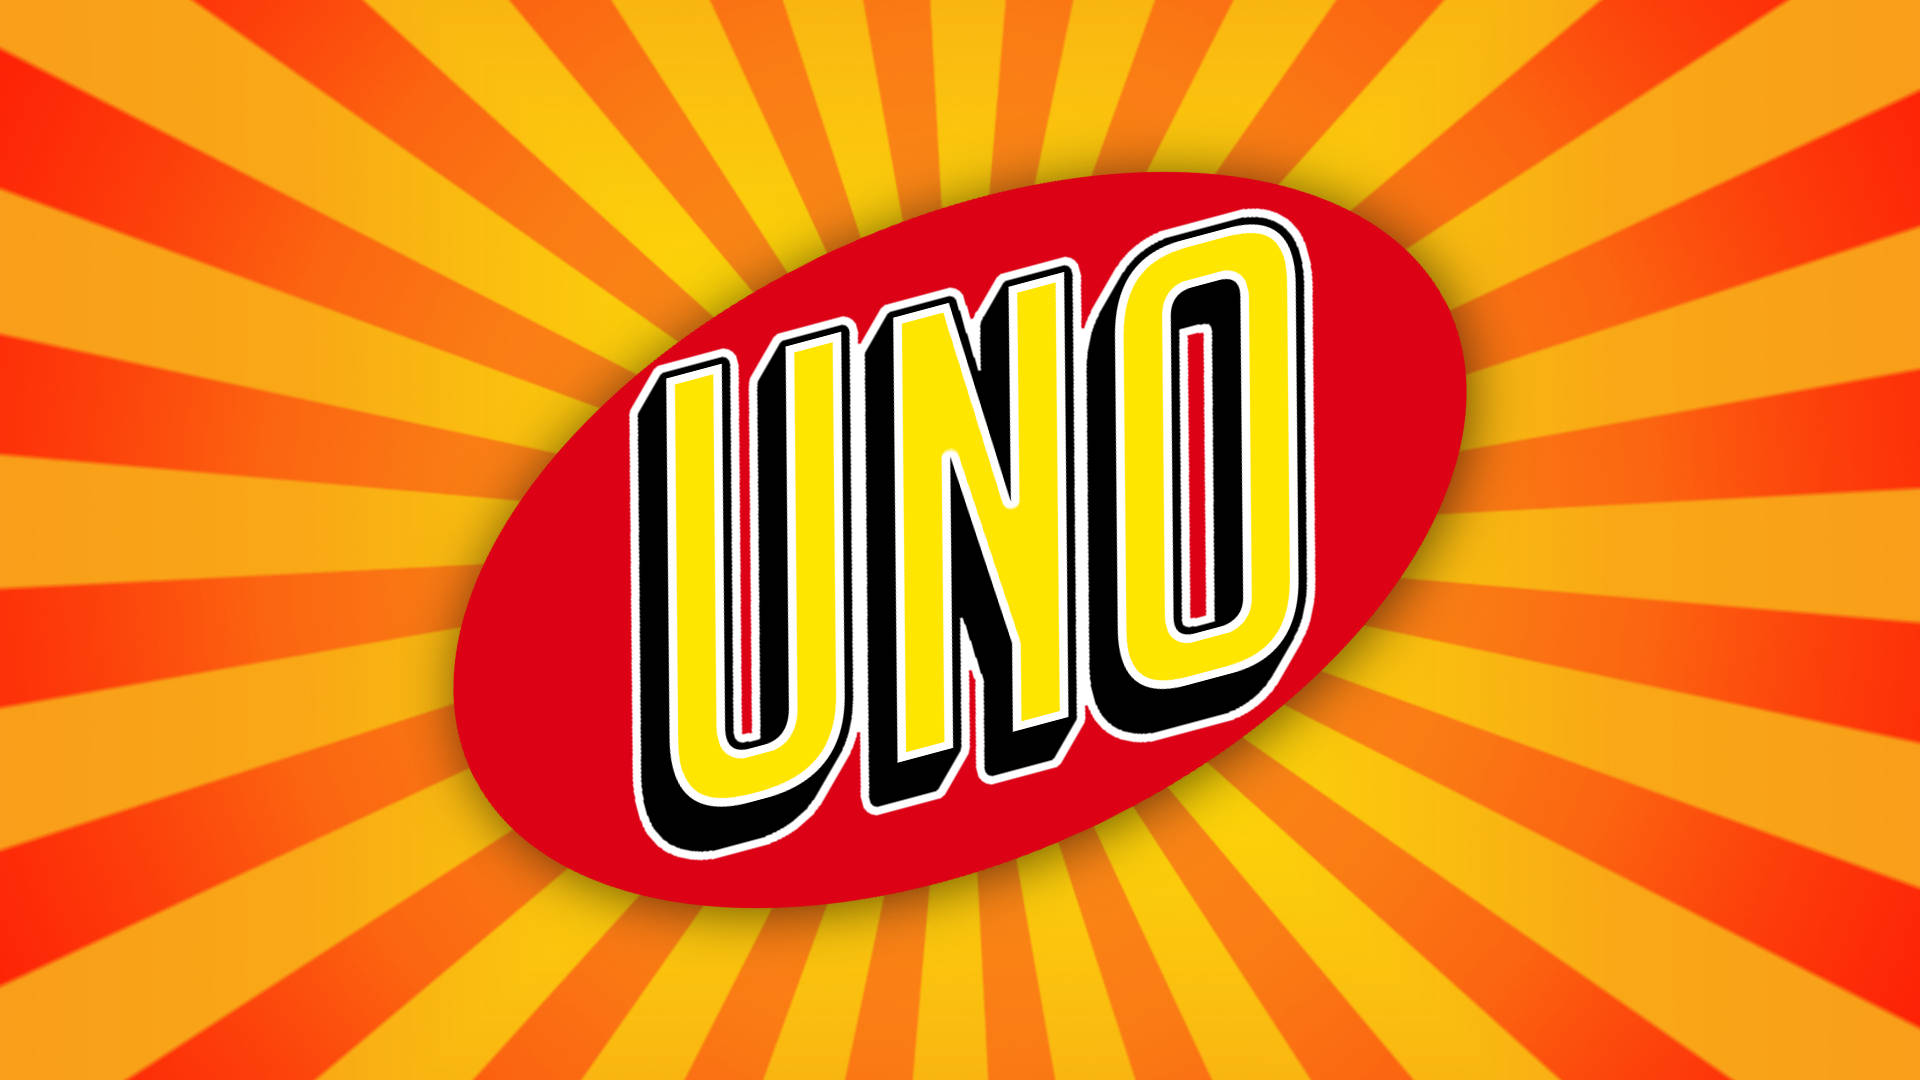 Classic Uno Card in Action Wallpaper